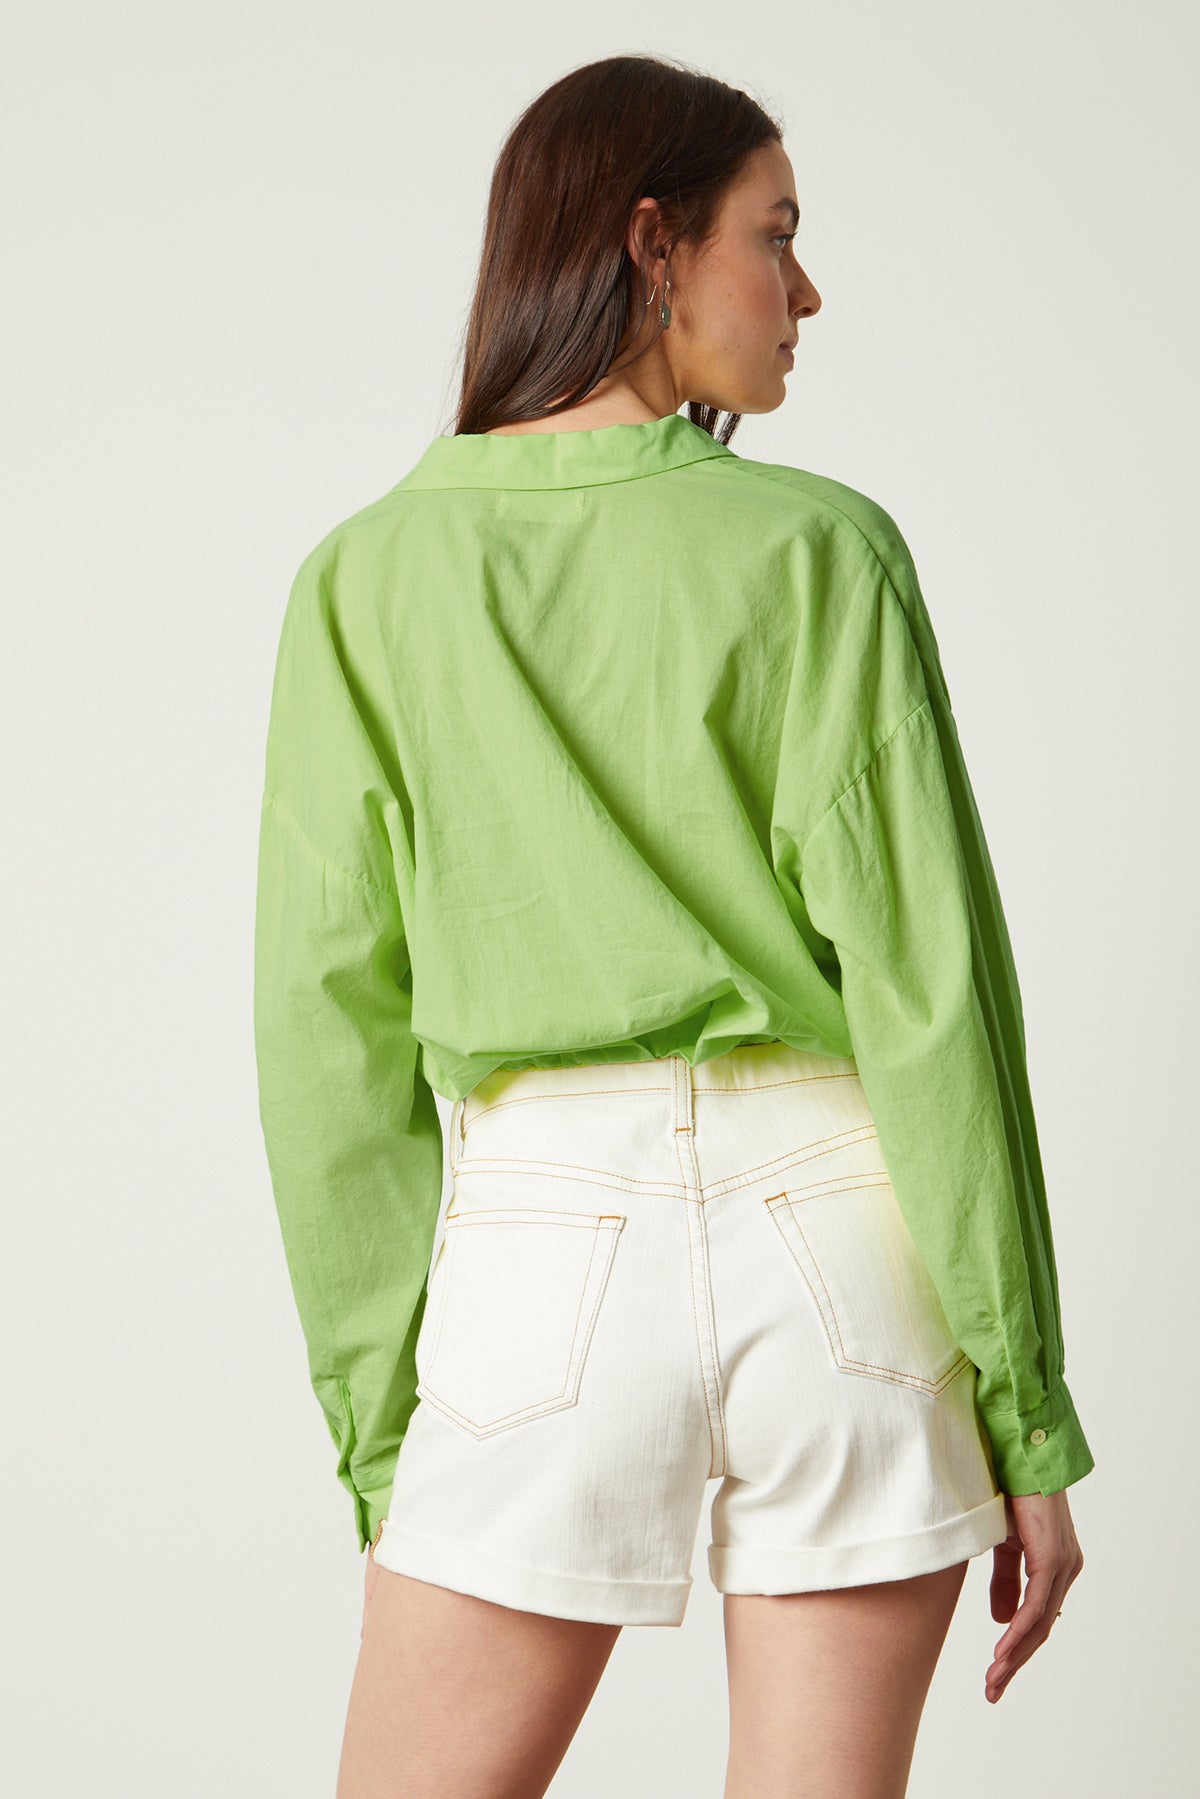 The back view of a woman wearing a Velvet by Graham & Spencer JULIA BUTTON-UP CROPPED SHIRT during the weekend.-26215481376961